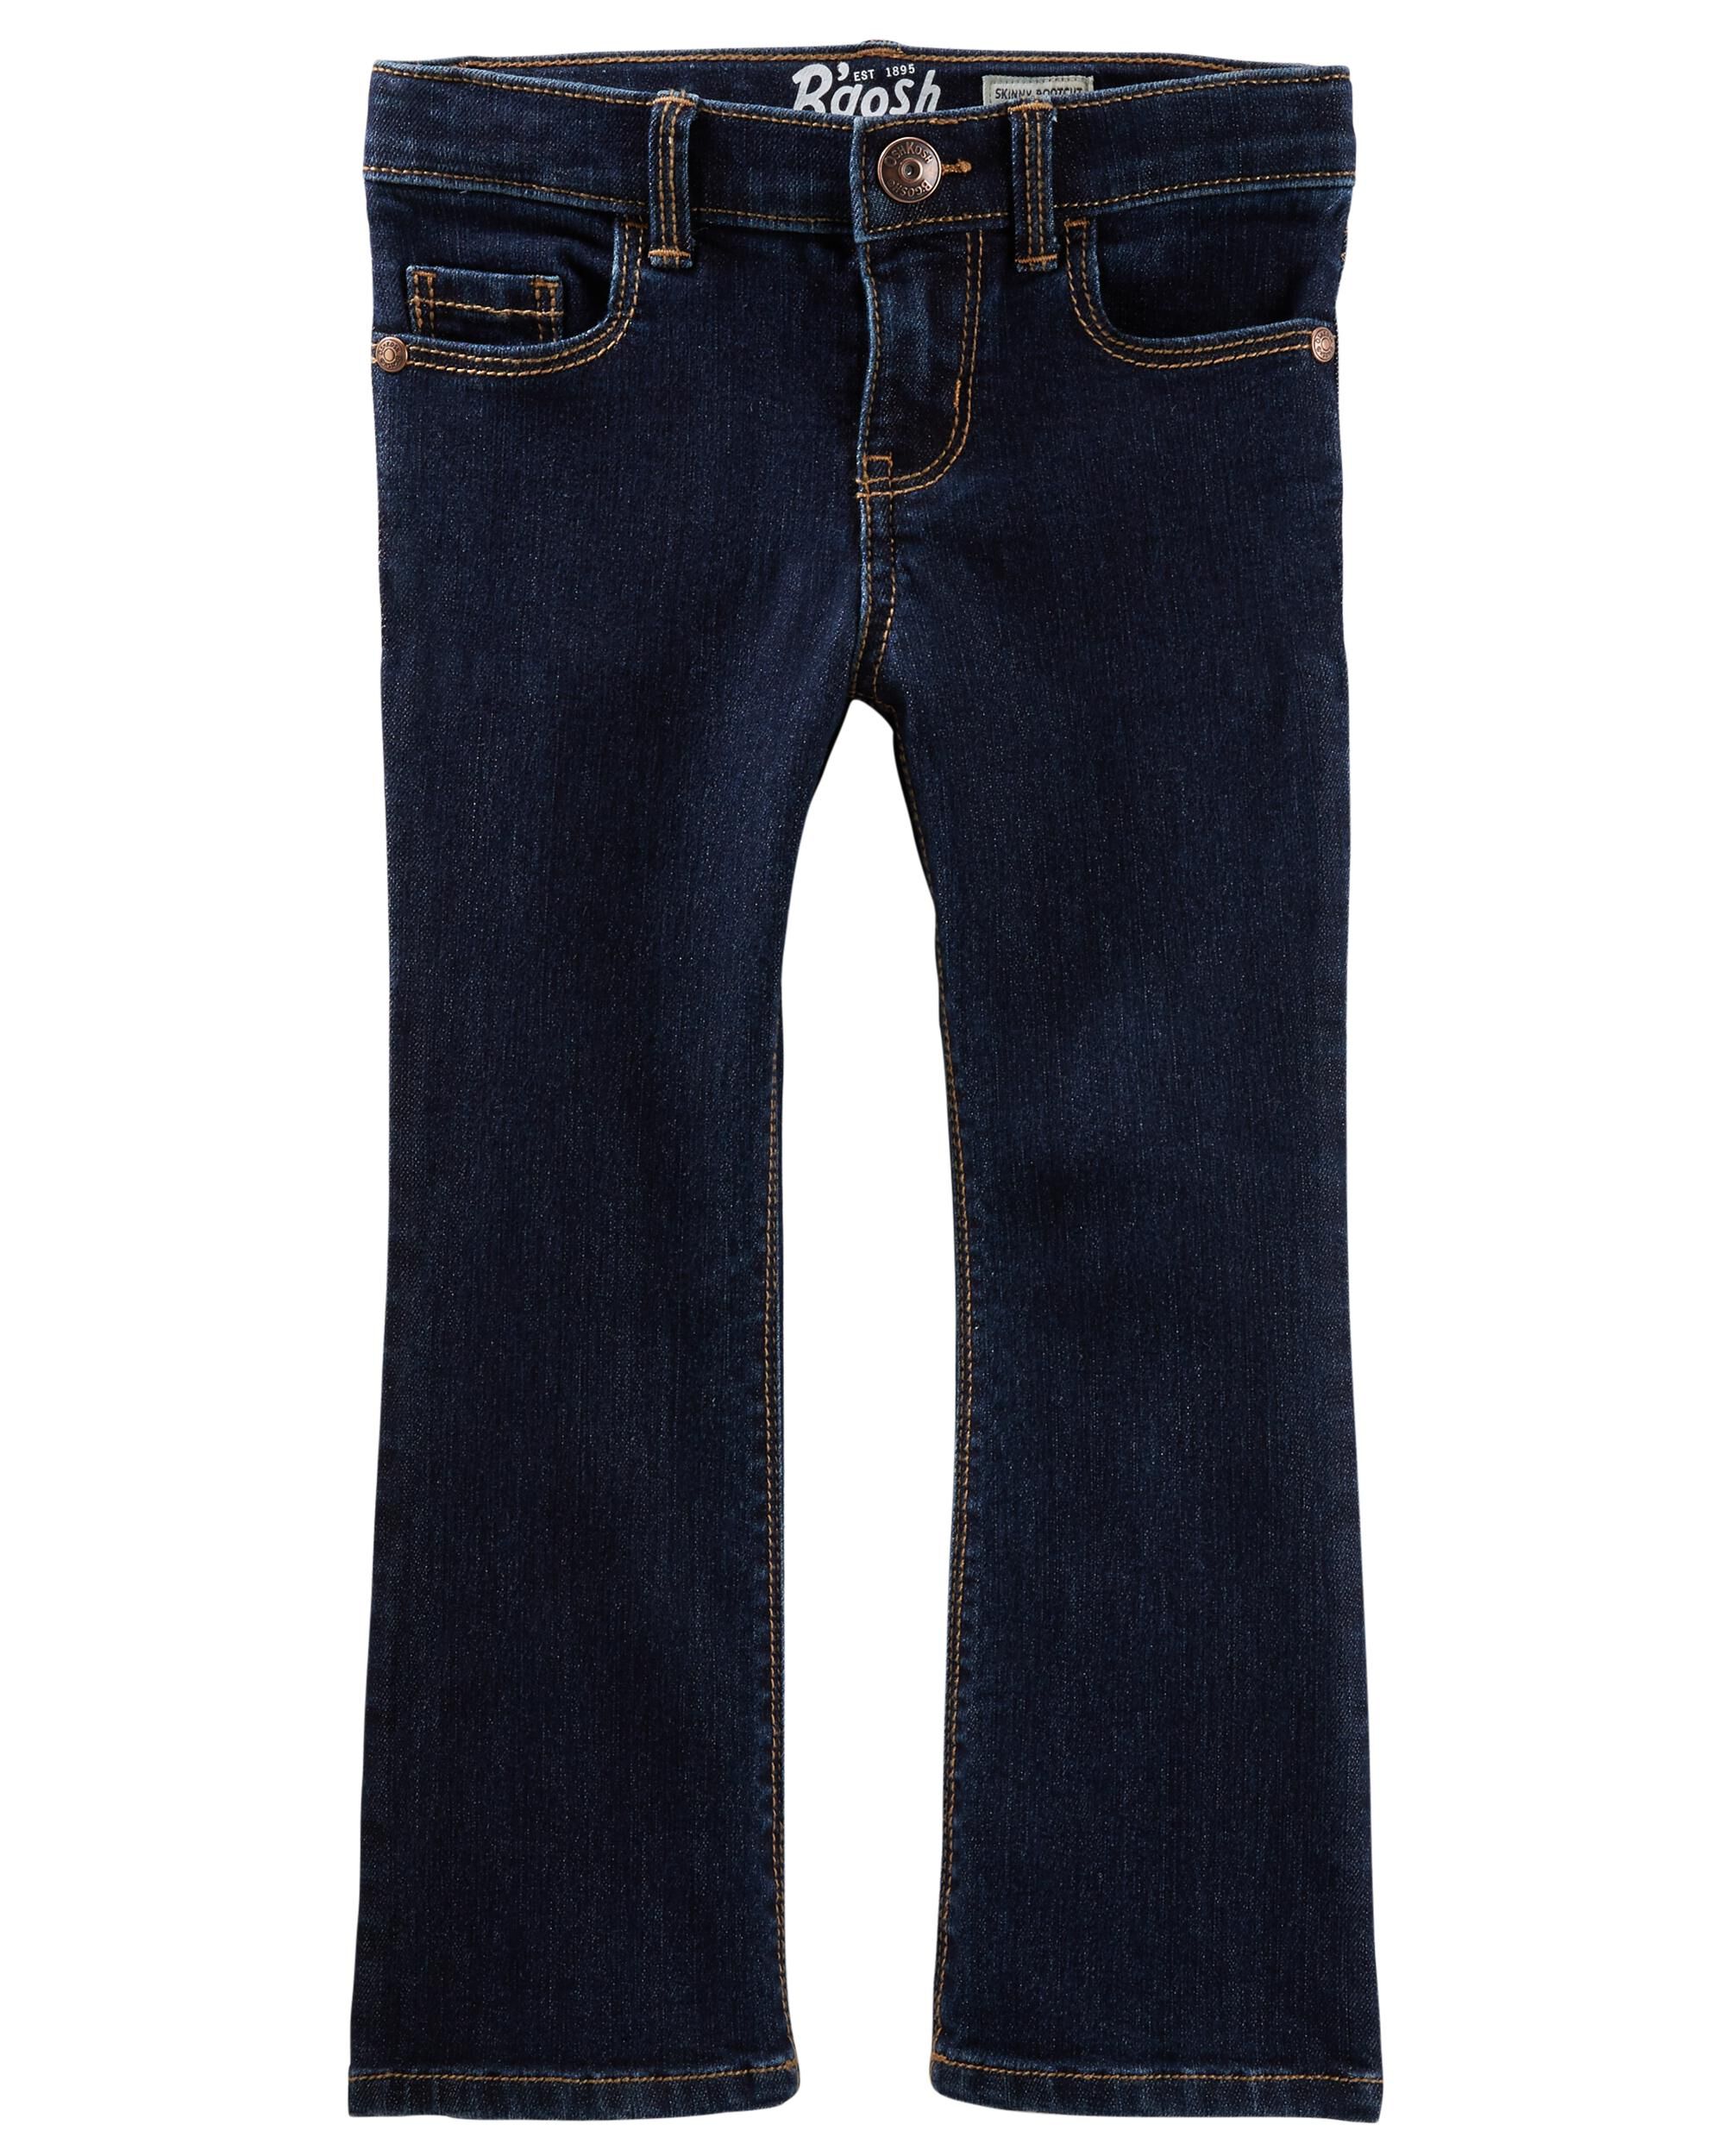 Carters Toddler Boot Cut Heritage Rinse Jeans